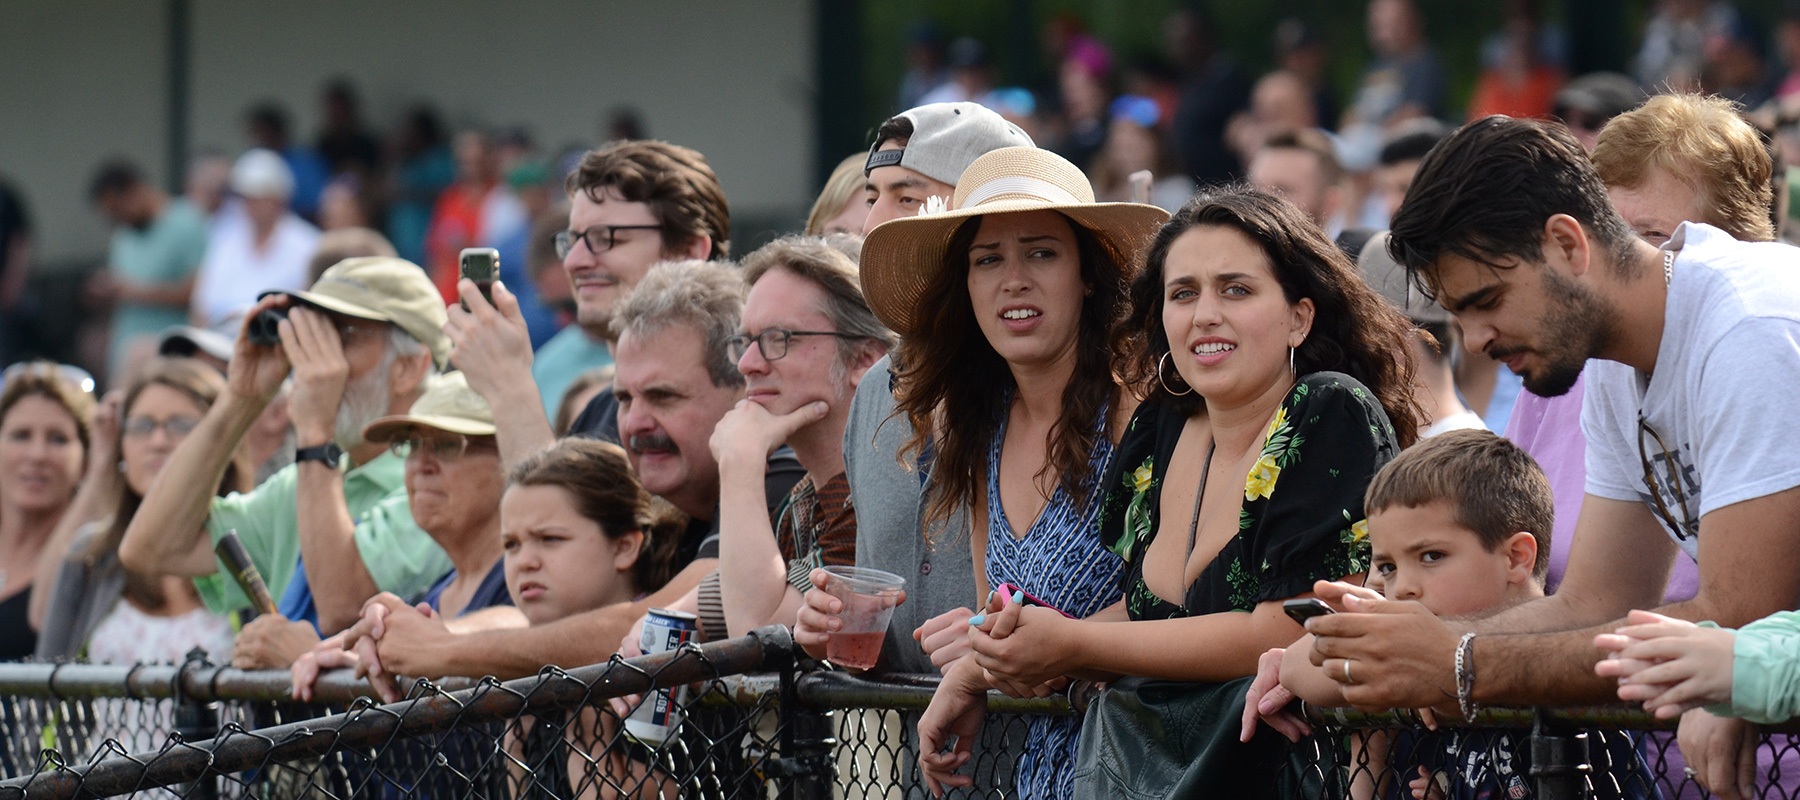 The crowd along the clubhouse rail at Suffolk Downs